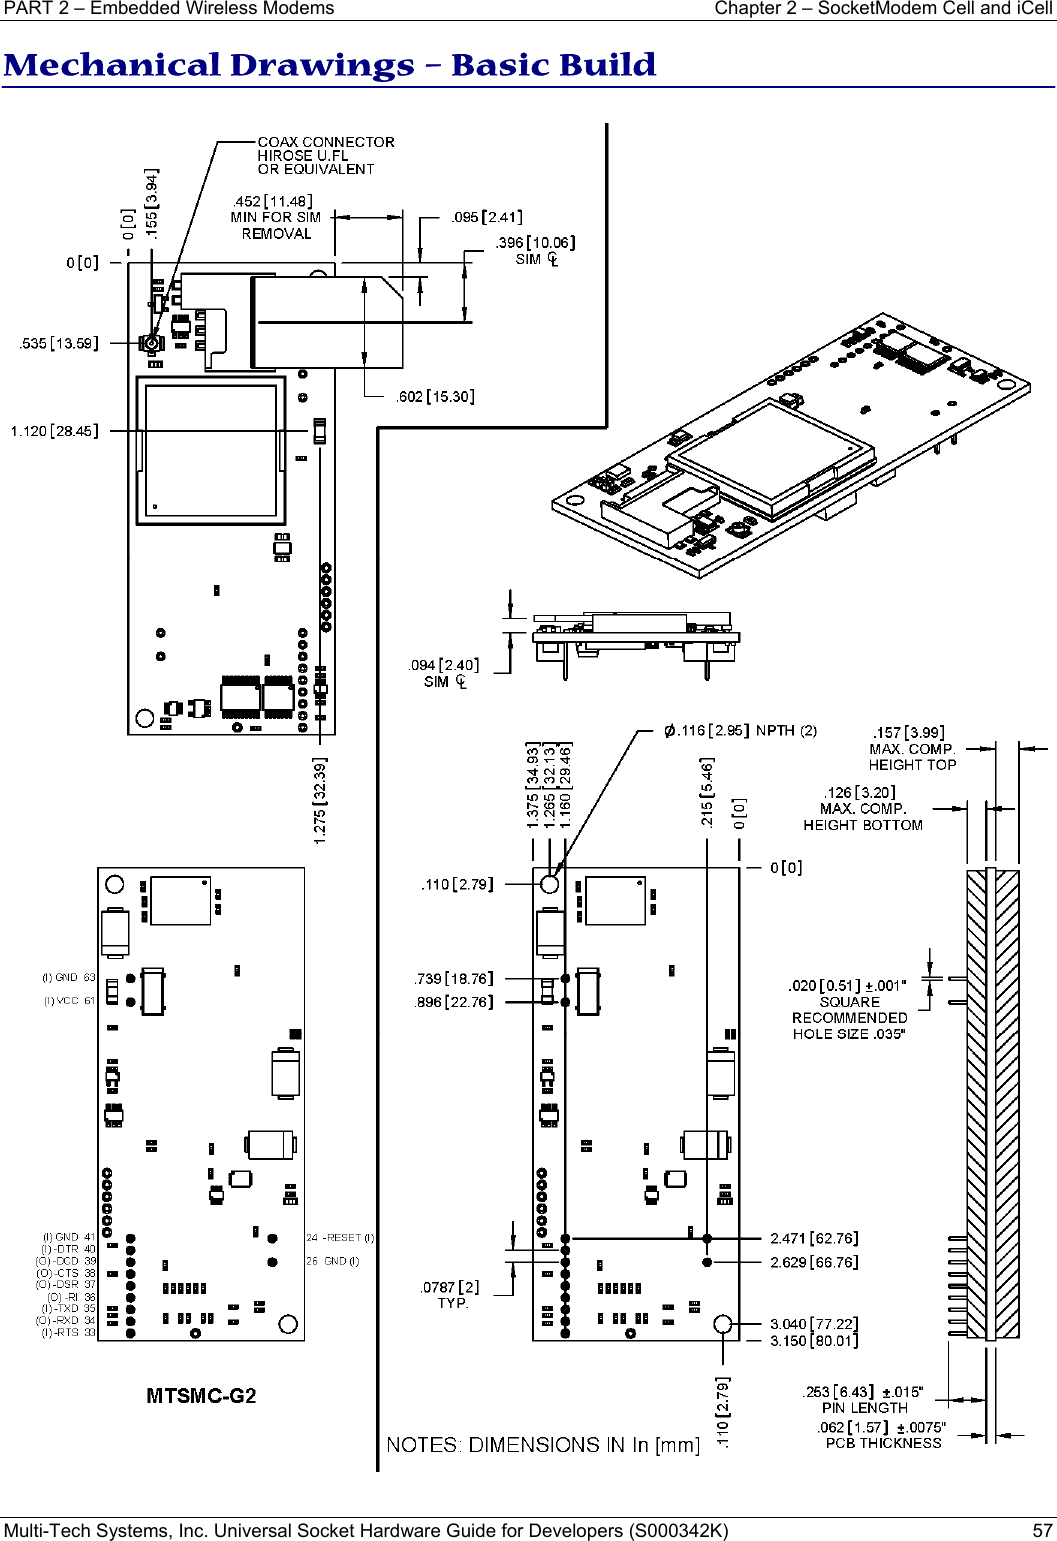 PART 2 – Embedded Wireless Modems   Chapter 2 – SocketModem Cell and iCell Multi-Tech Systems, Inc. Universal Socket Hardware Guide for Developers (S000342K)  57  Mechanical Drawings – Basic Build   